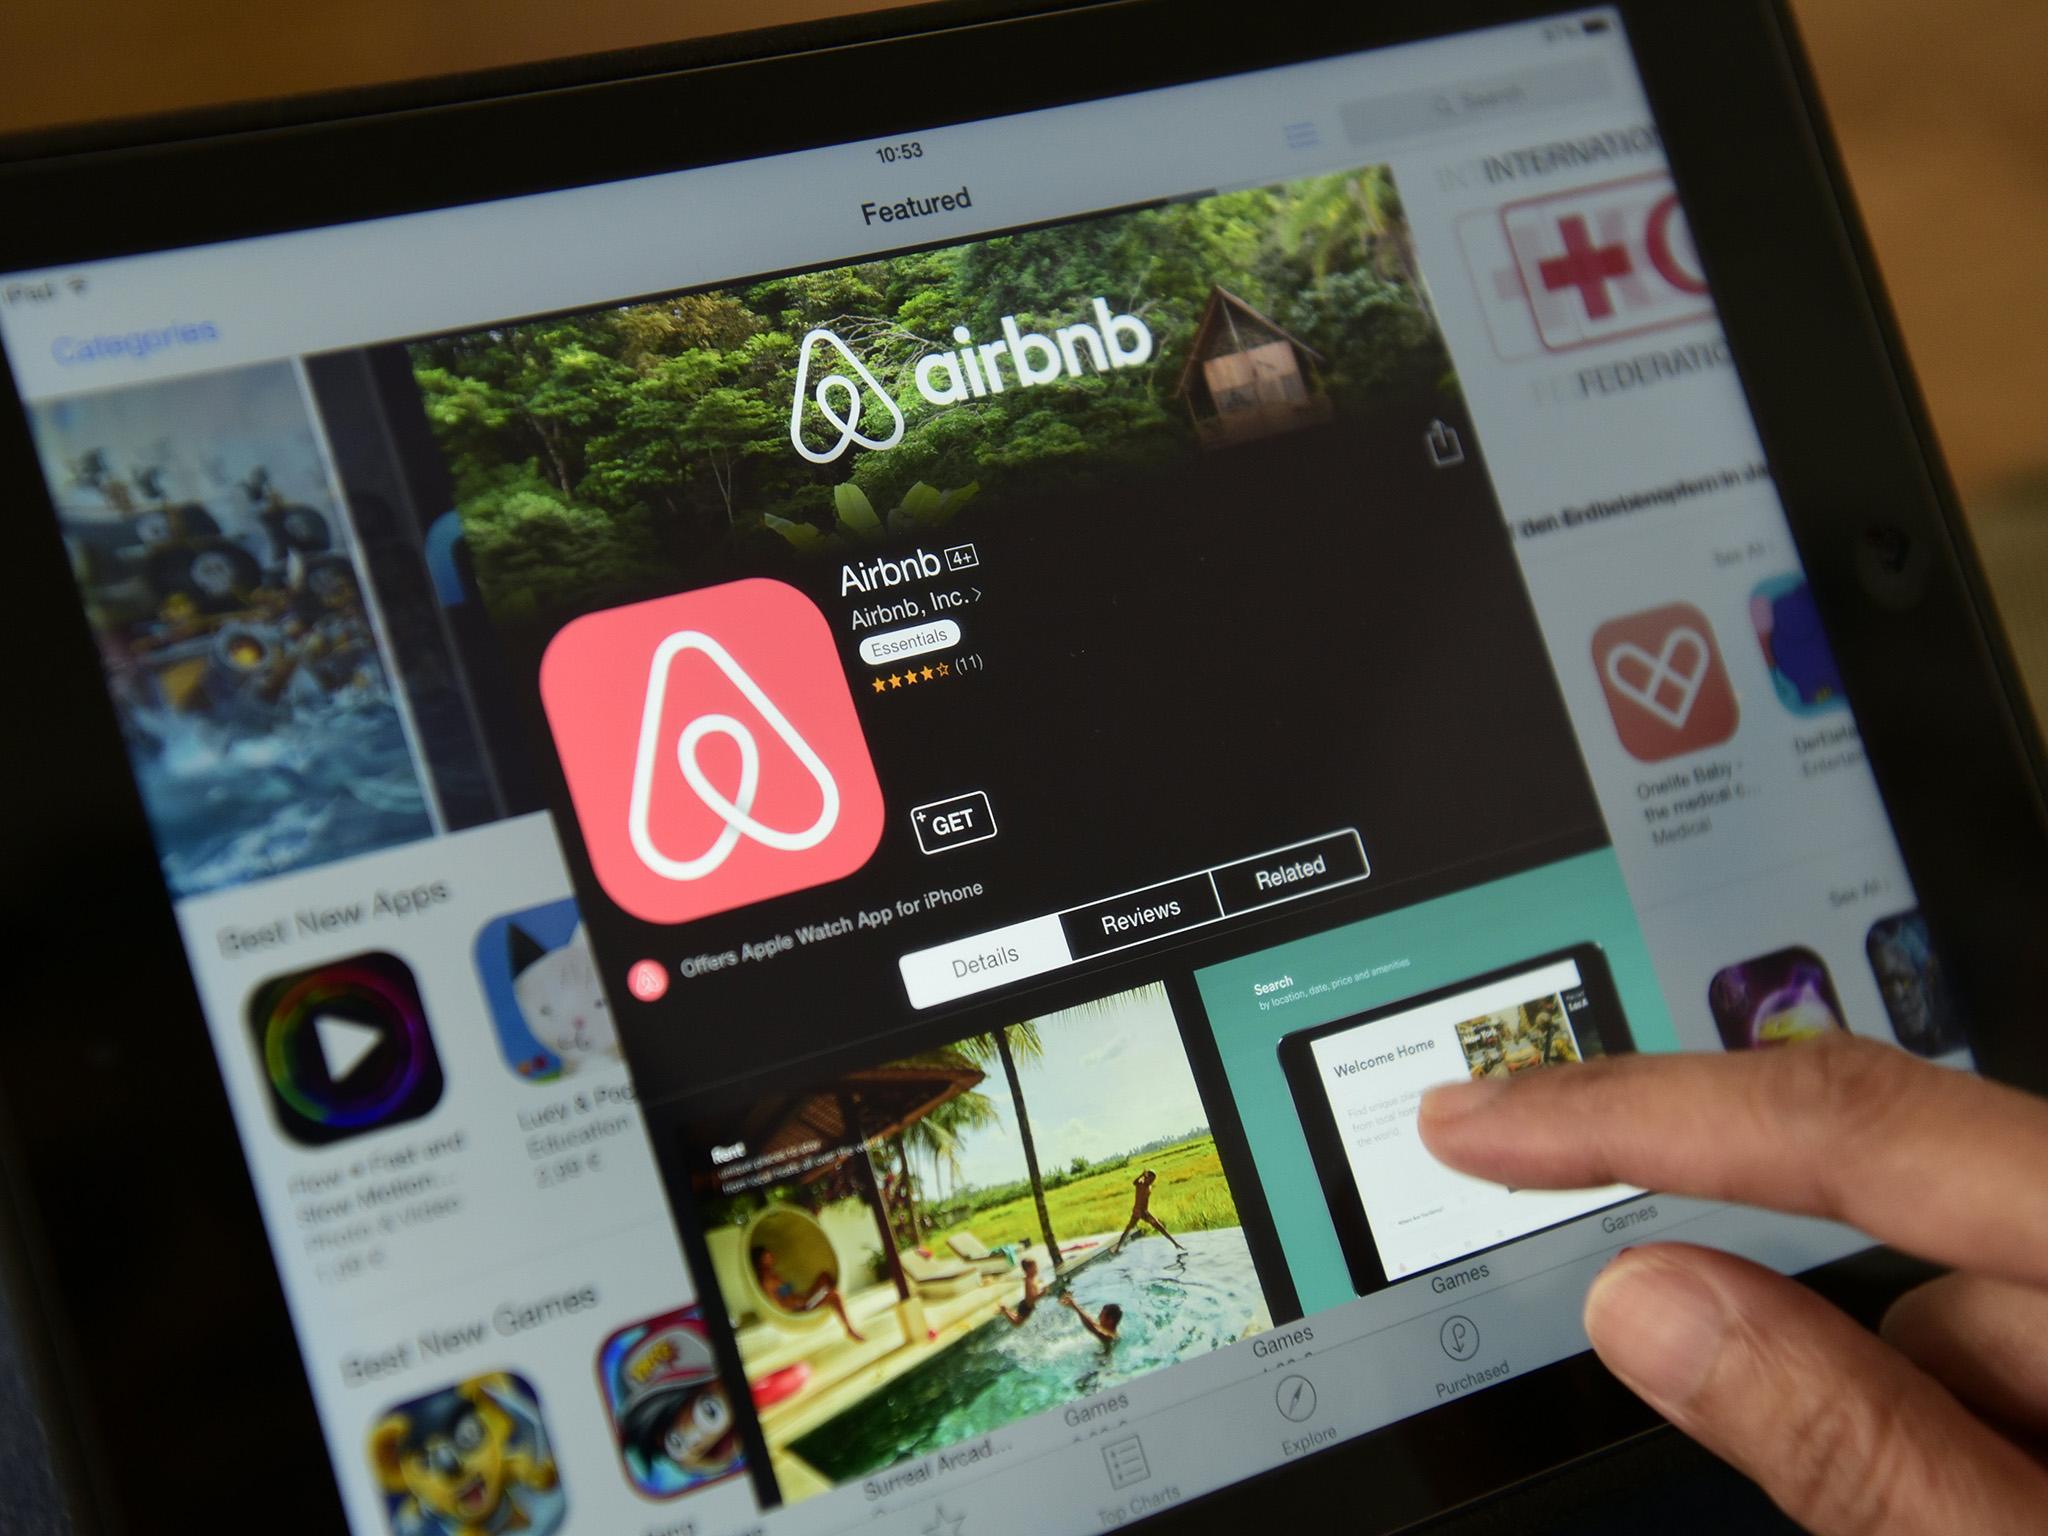 Airbnb is one of the world’s biggest rentals booking websites